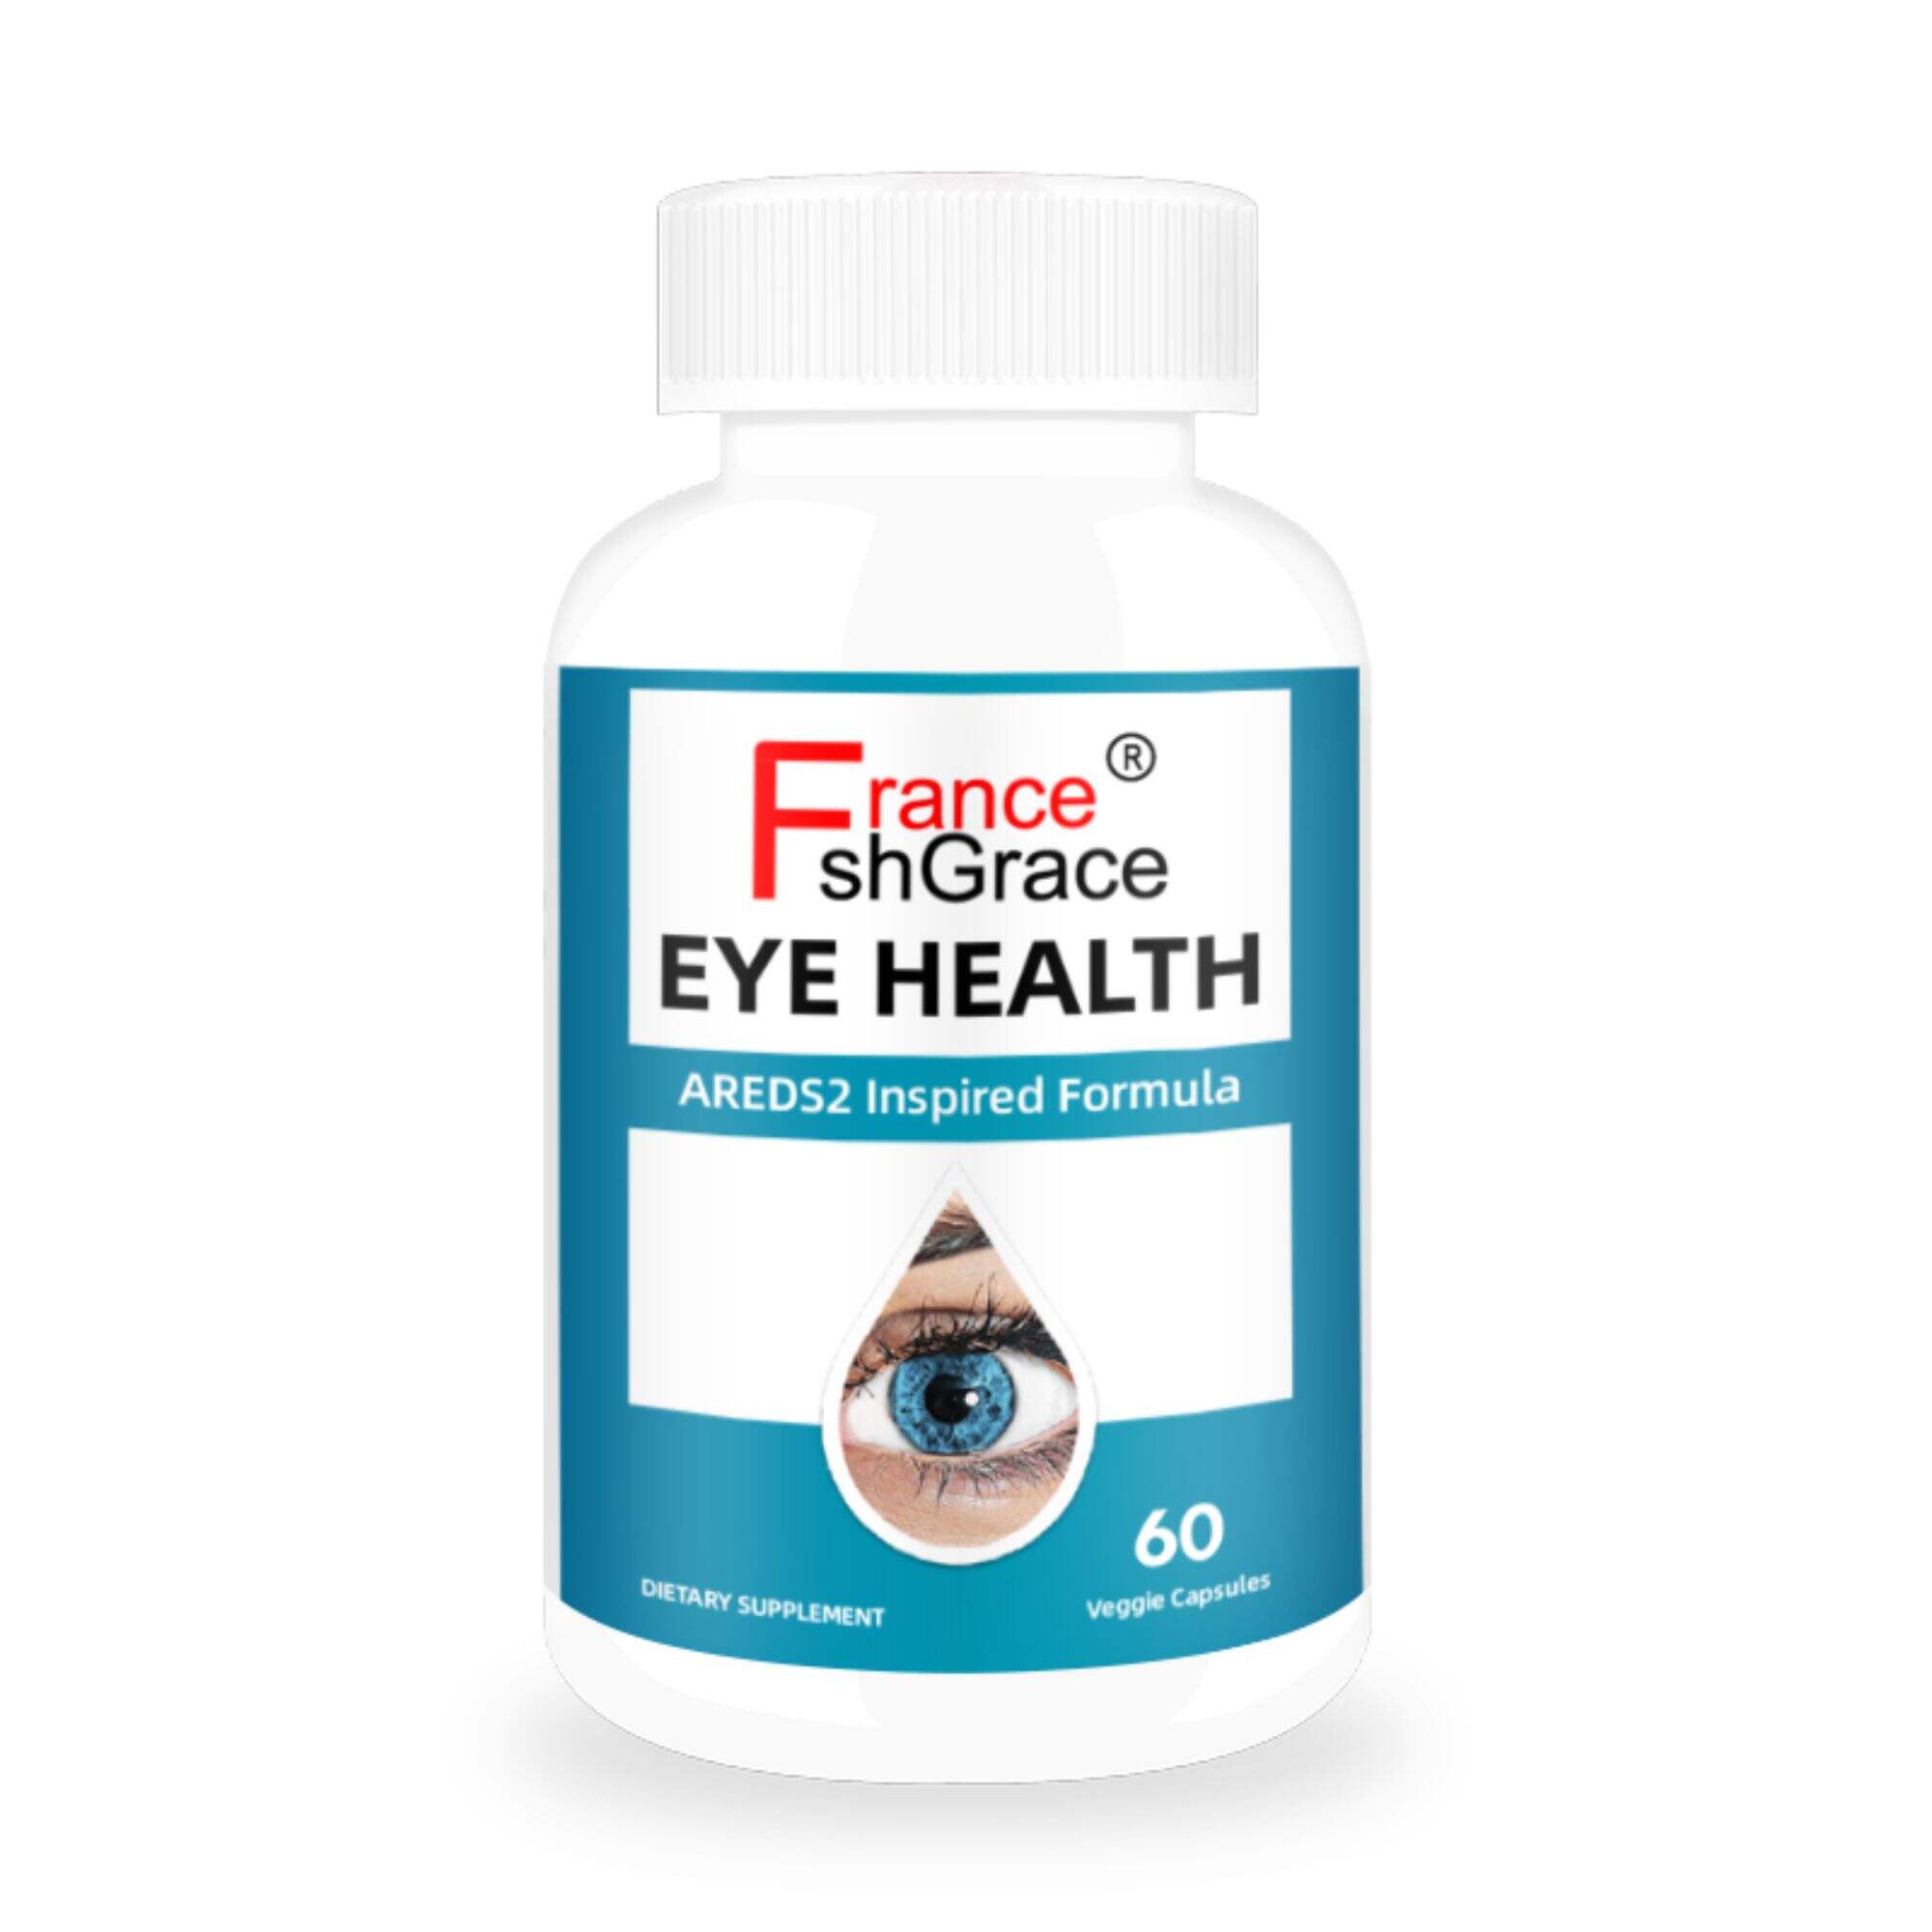 Vitamins w/ Lutein, Zeaxanthin & Bilberry Extract - Supports Eye Strain, Dry Eyes, and Vision Health